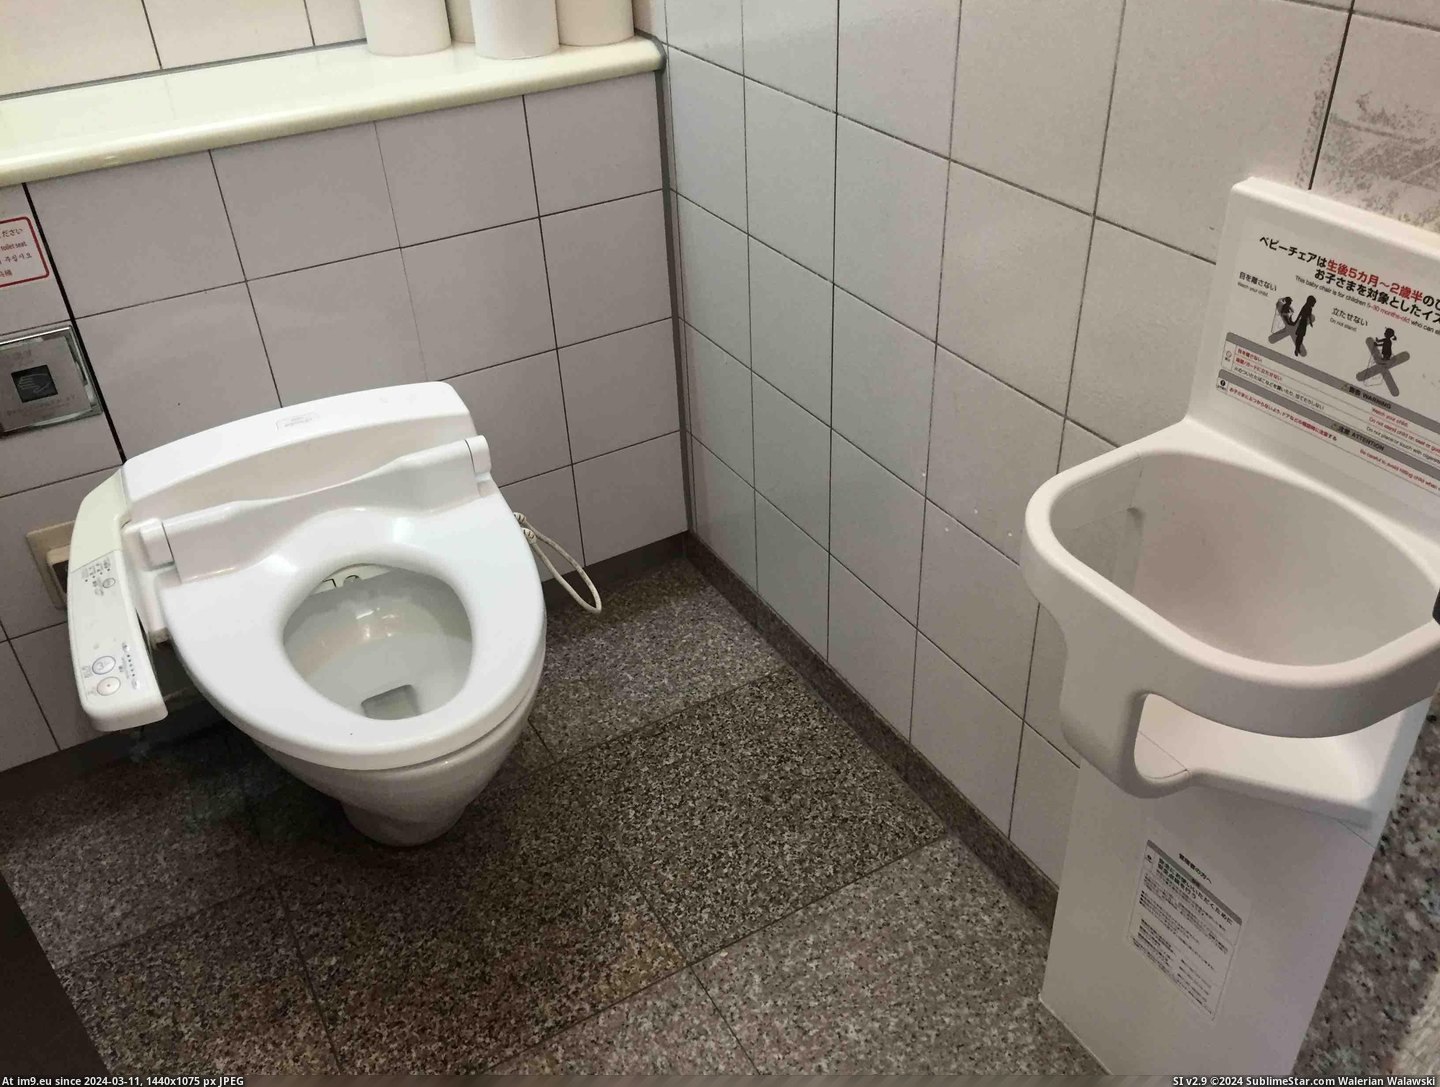 #Japan #Toilet #Child #Place [Mildlyinteresting] This toilet in Japan has a place to put your child. Pic. (Изображение из альбом My r/MILDLYINTERESTING favs))